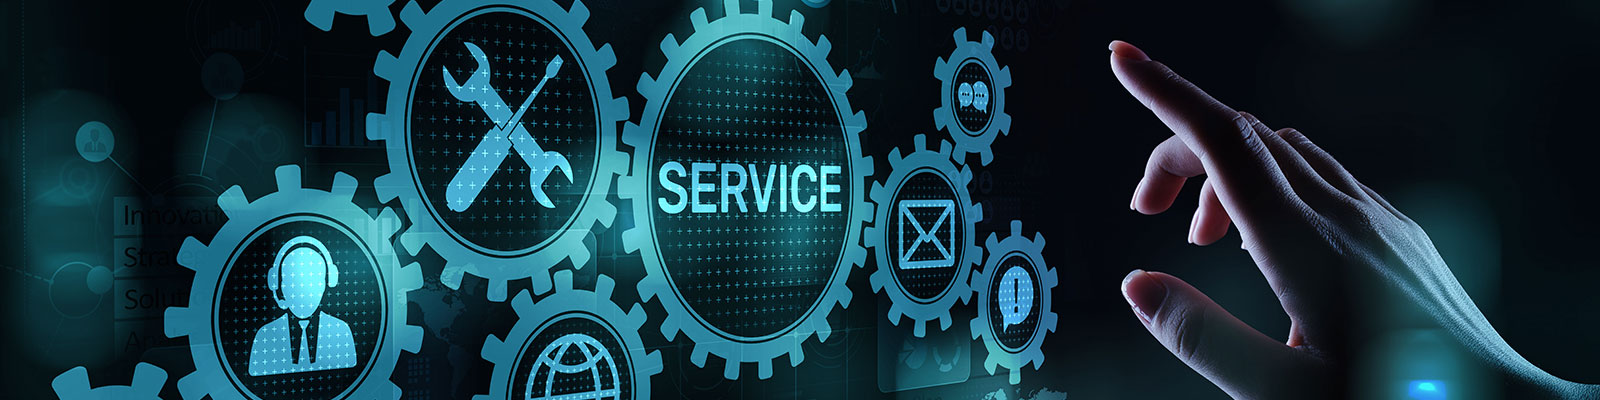 Hand reaching to select services from different gears